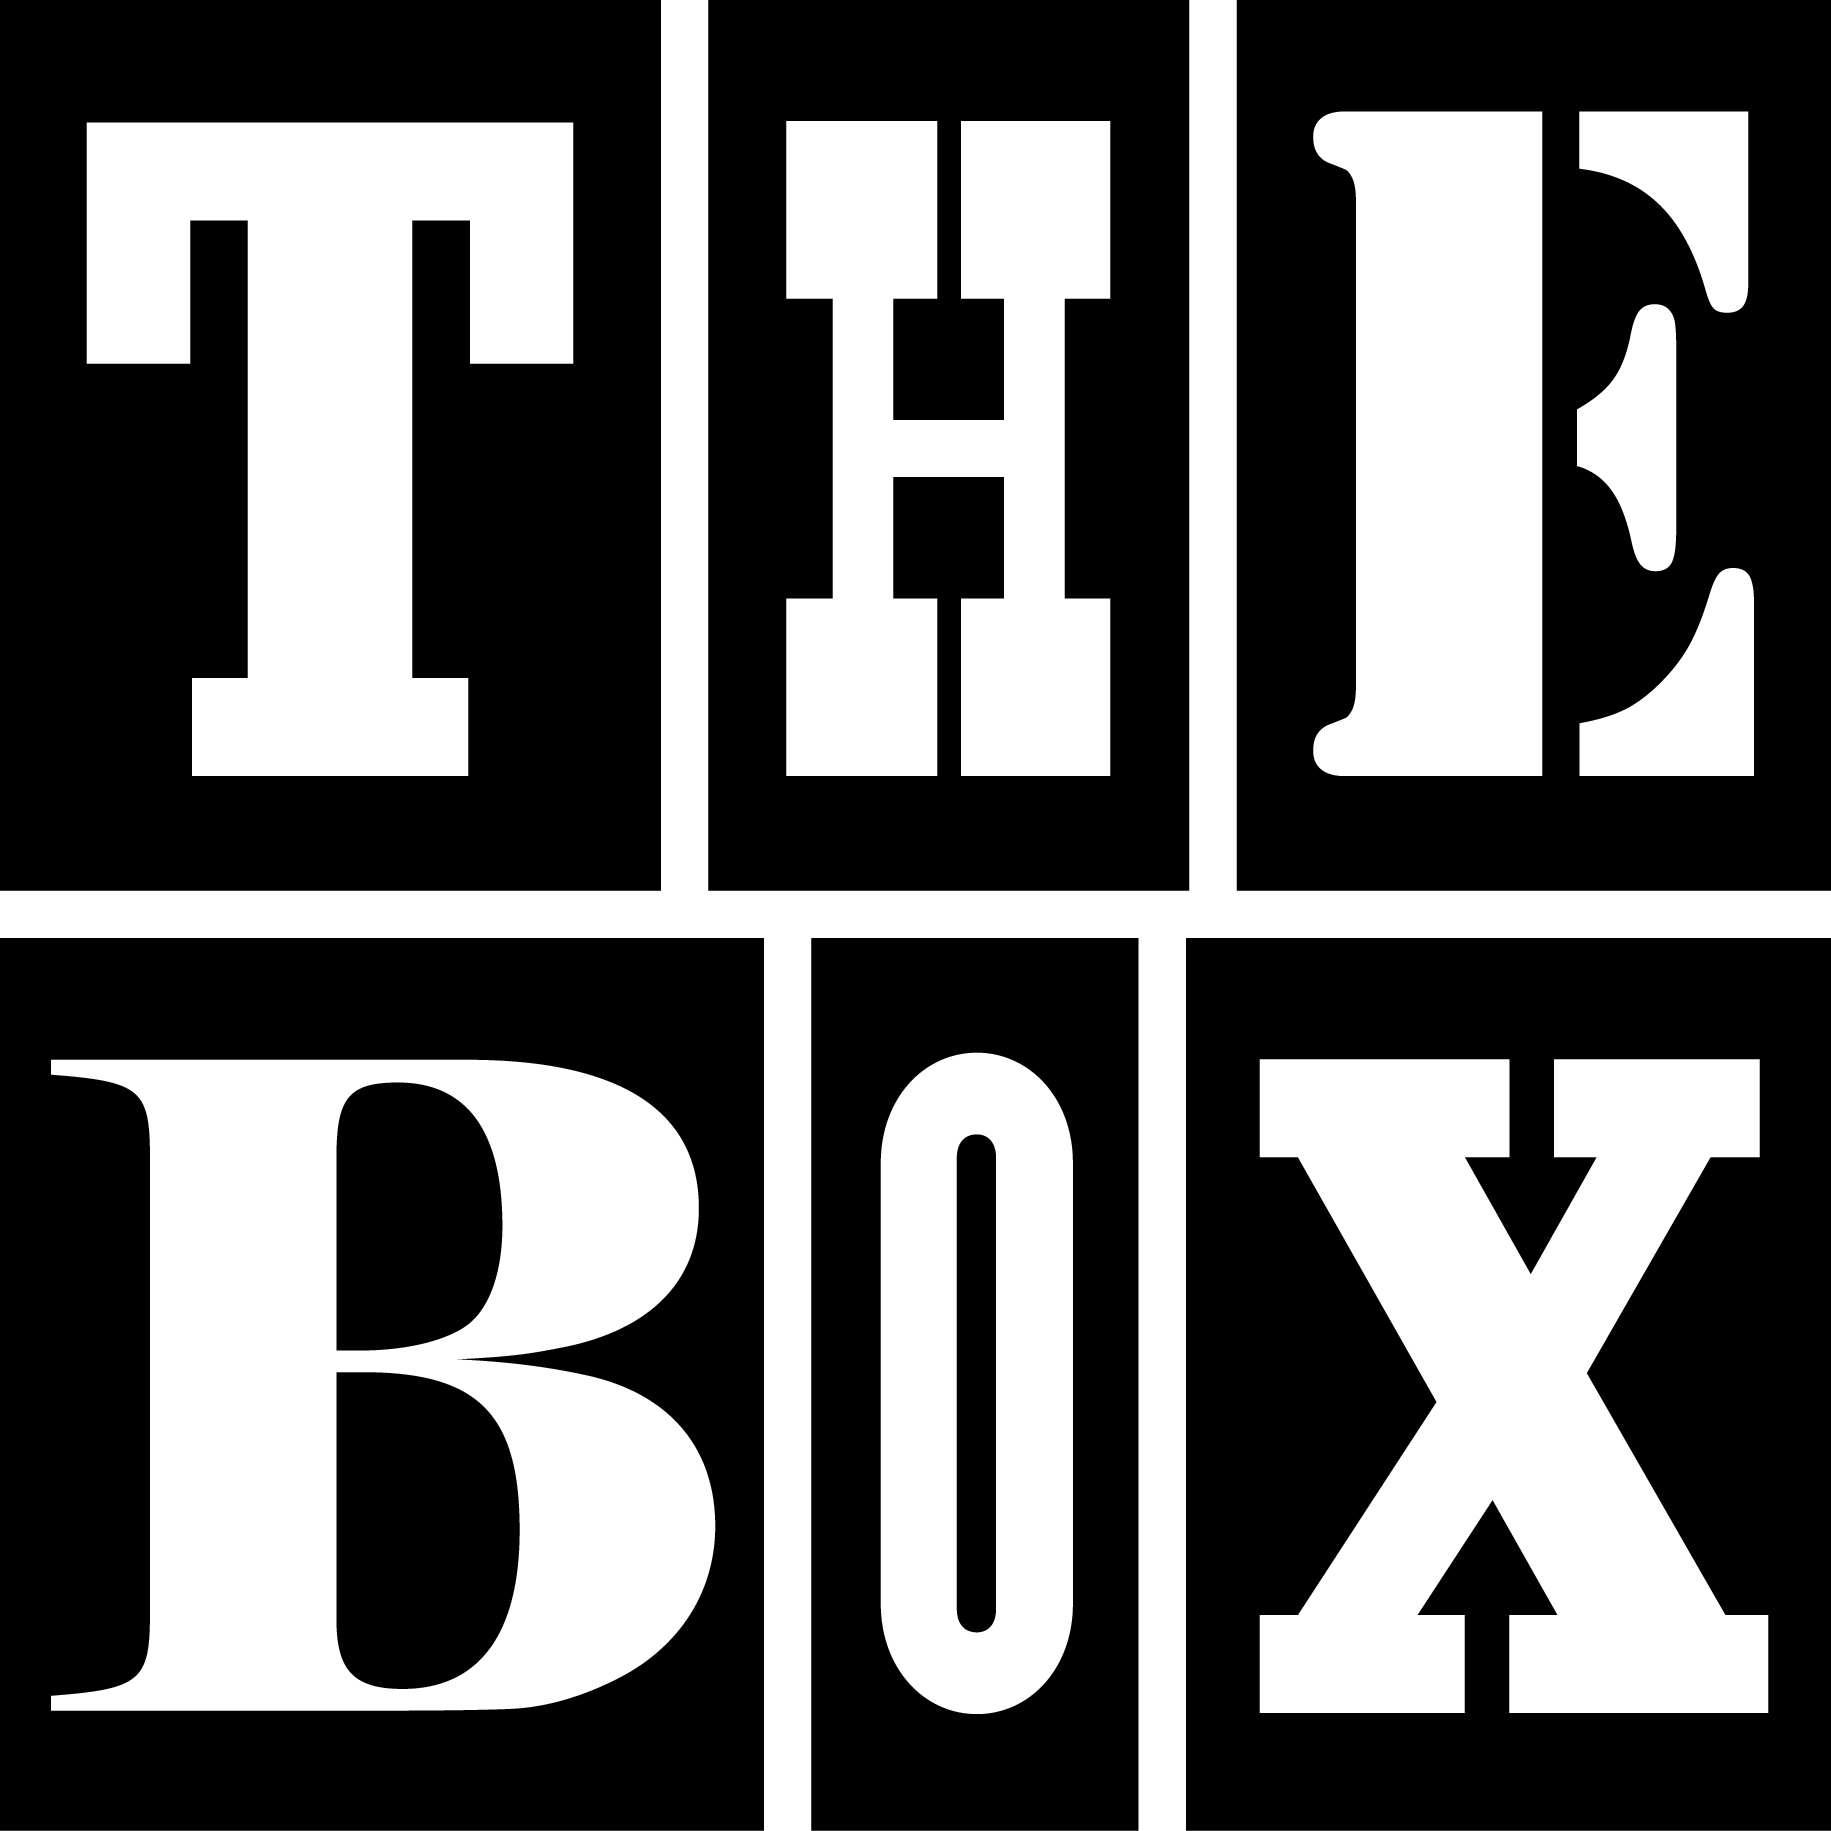 THE_BOX_LOGO_BW_SOLID